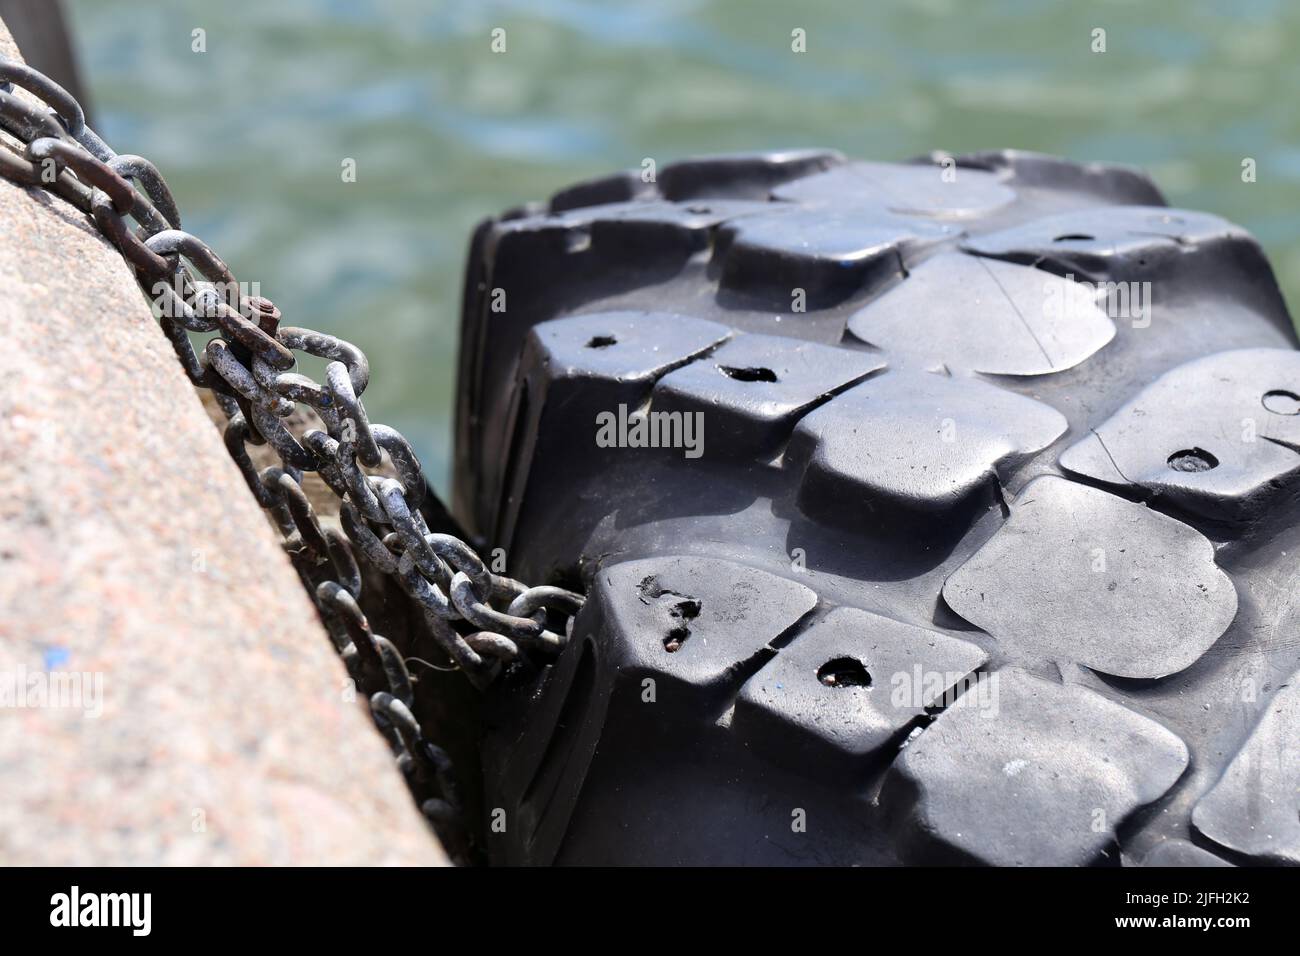 Rubber tyre used as a safety buffer for boats parking to the harbor. Maritime view with the sea, some concrete and the tire hanging with a chain. Stock Photo